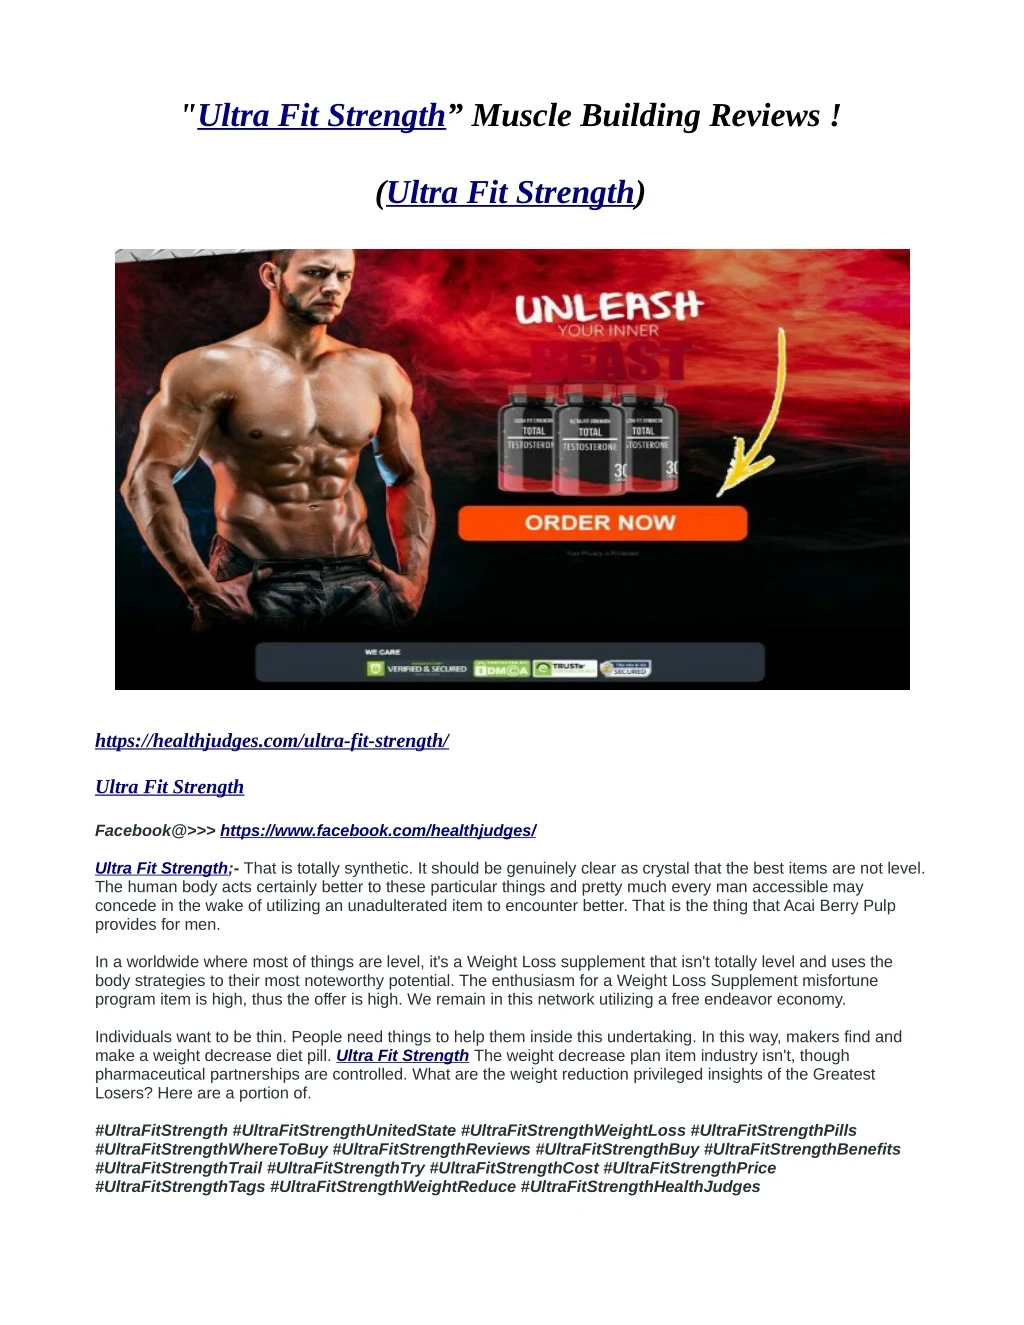 ultra fit strength muscle building reviews